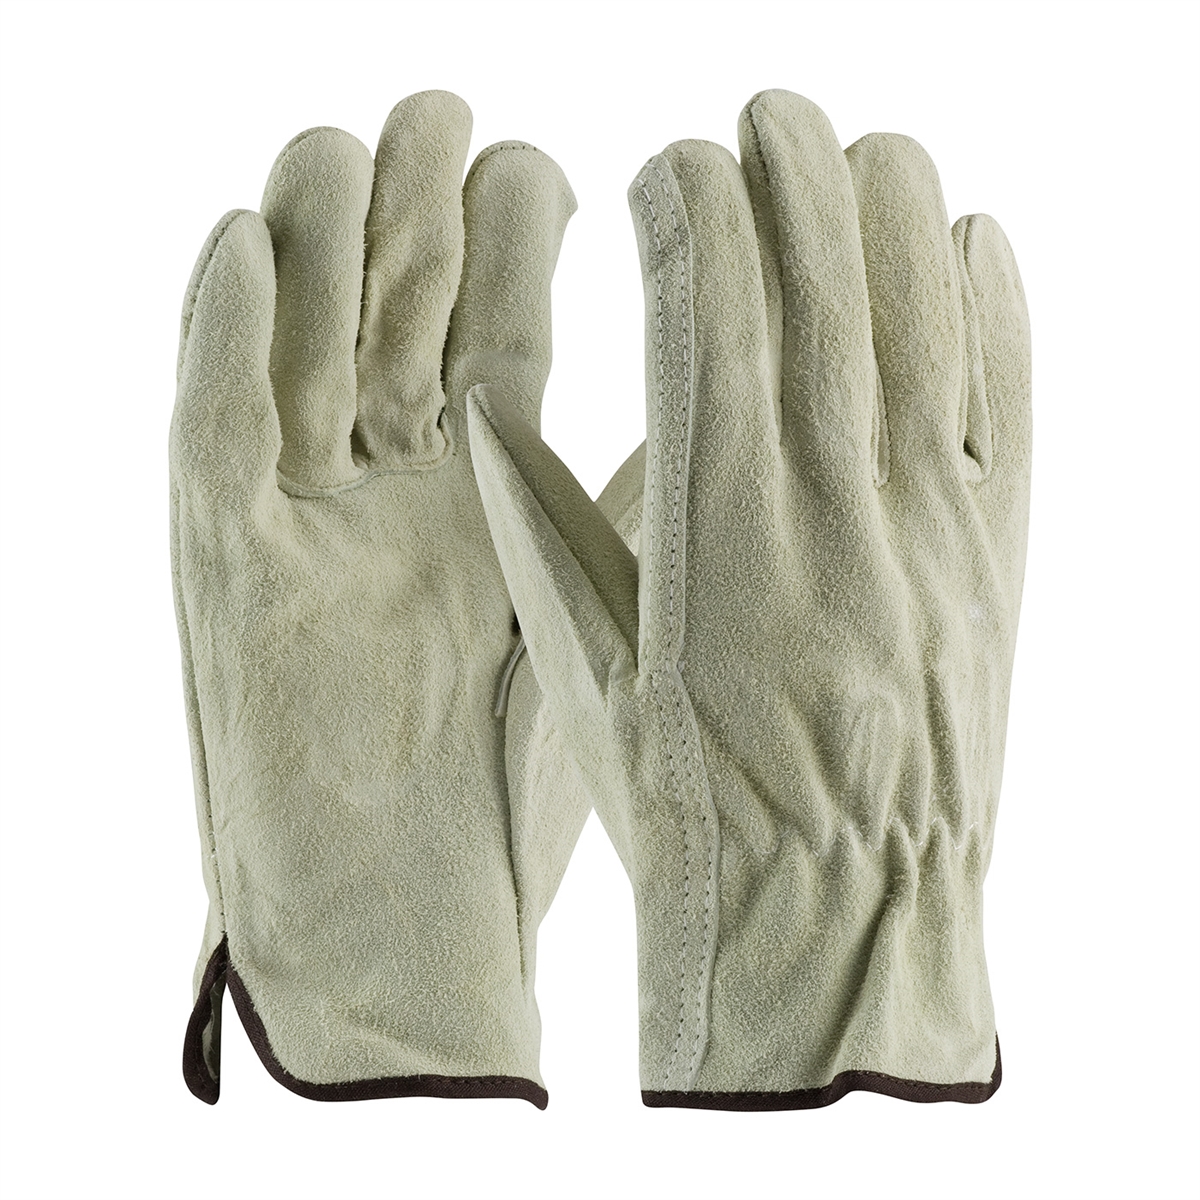 PIP® 69-134 Regular Grade General Purpose Gloves, Drivers, Split Cowhide Leather Palm, Split Cowhide Leather, Tan, Slip-On Cuff, Uncoated Coating, Resists: Abrasion, Unlined Lining, Straight Thumb